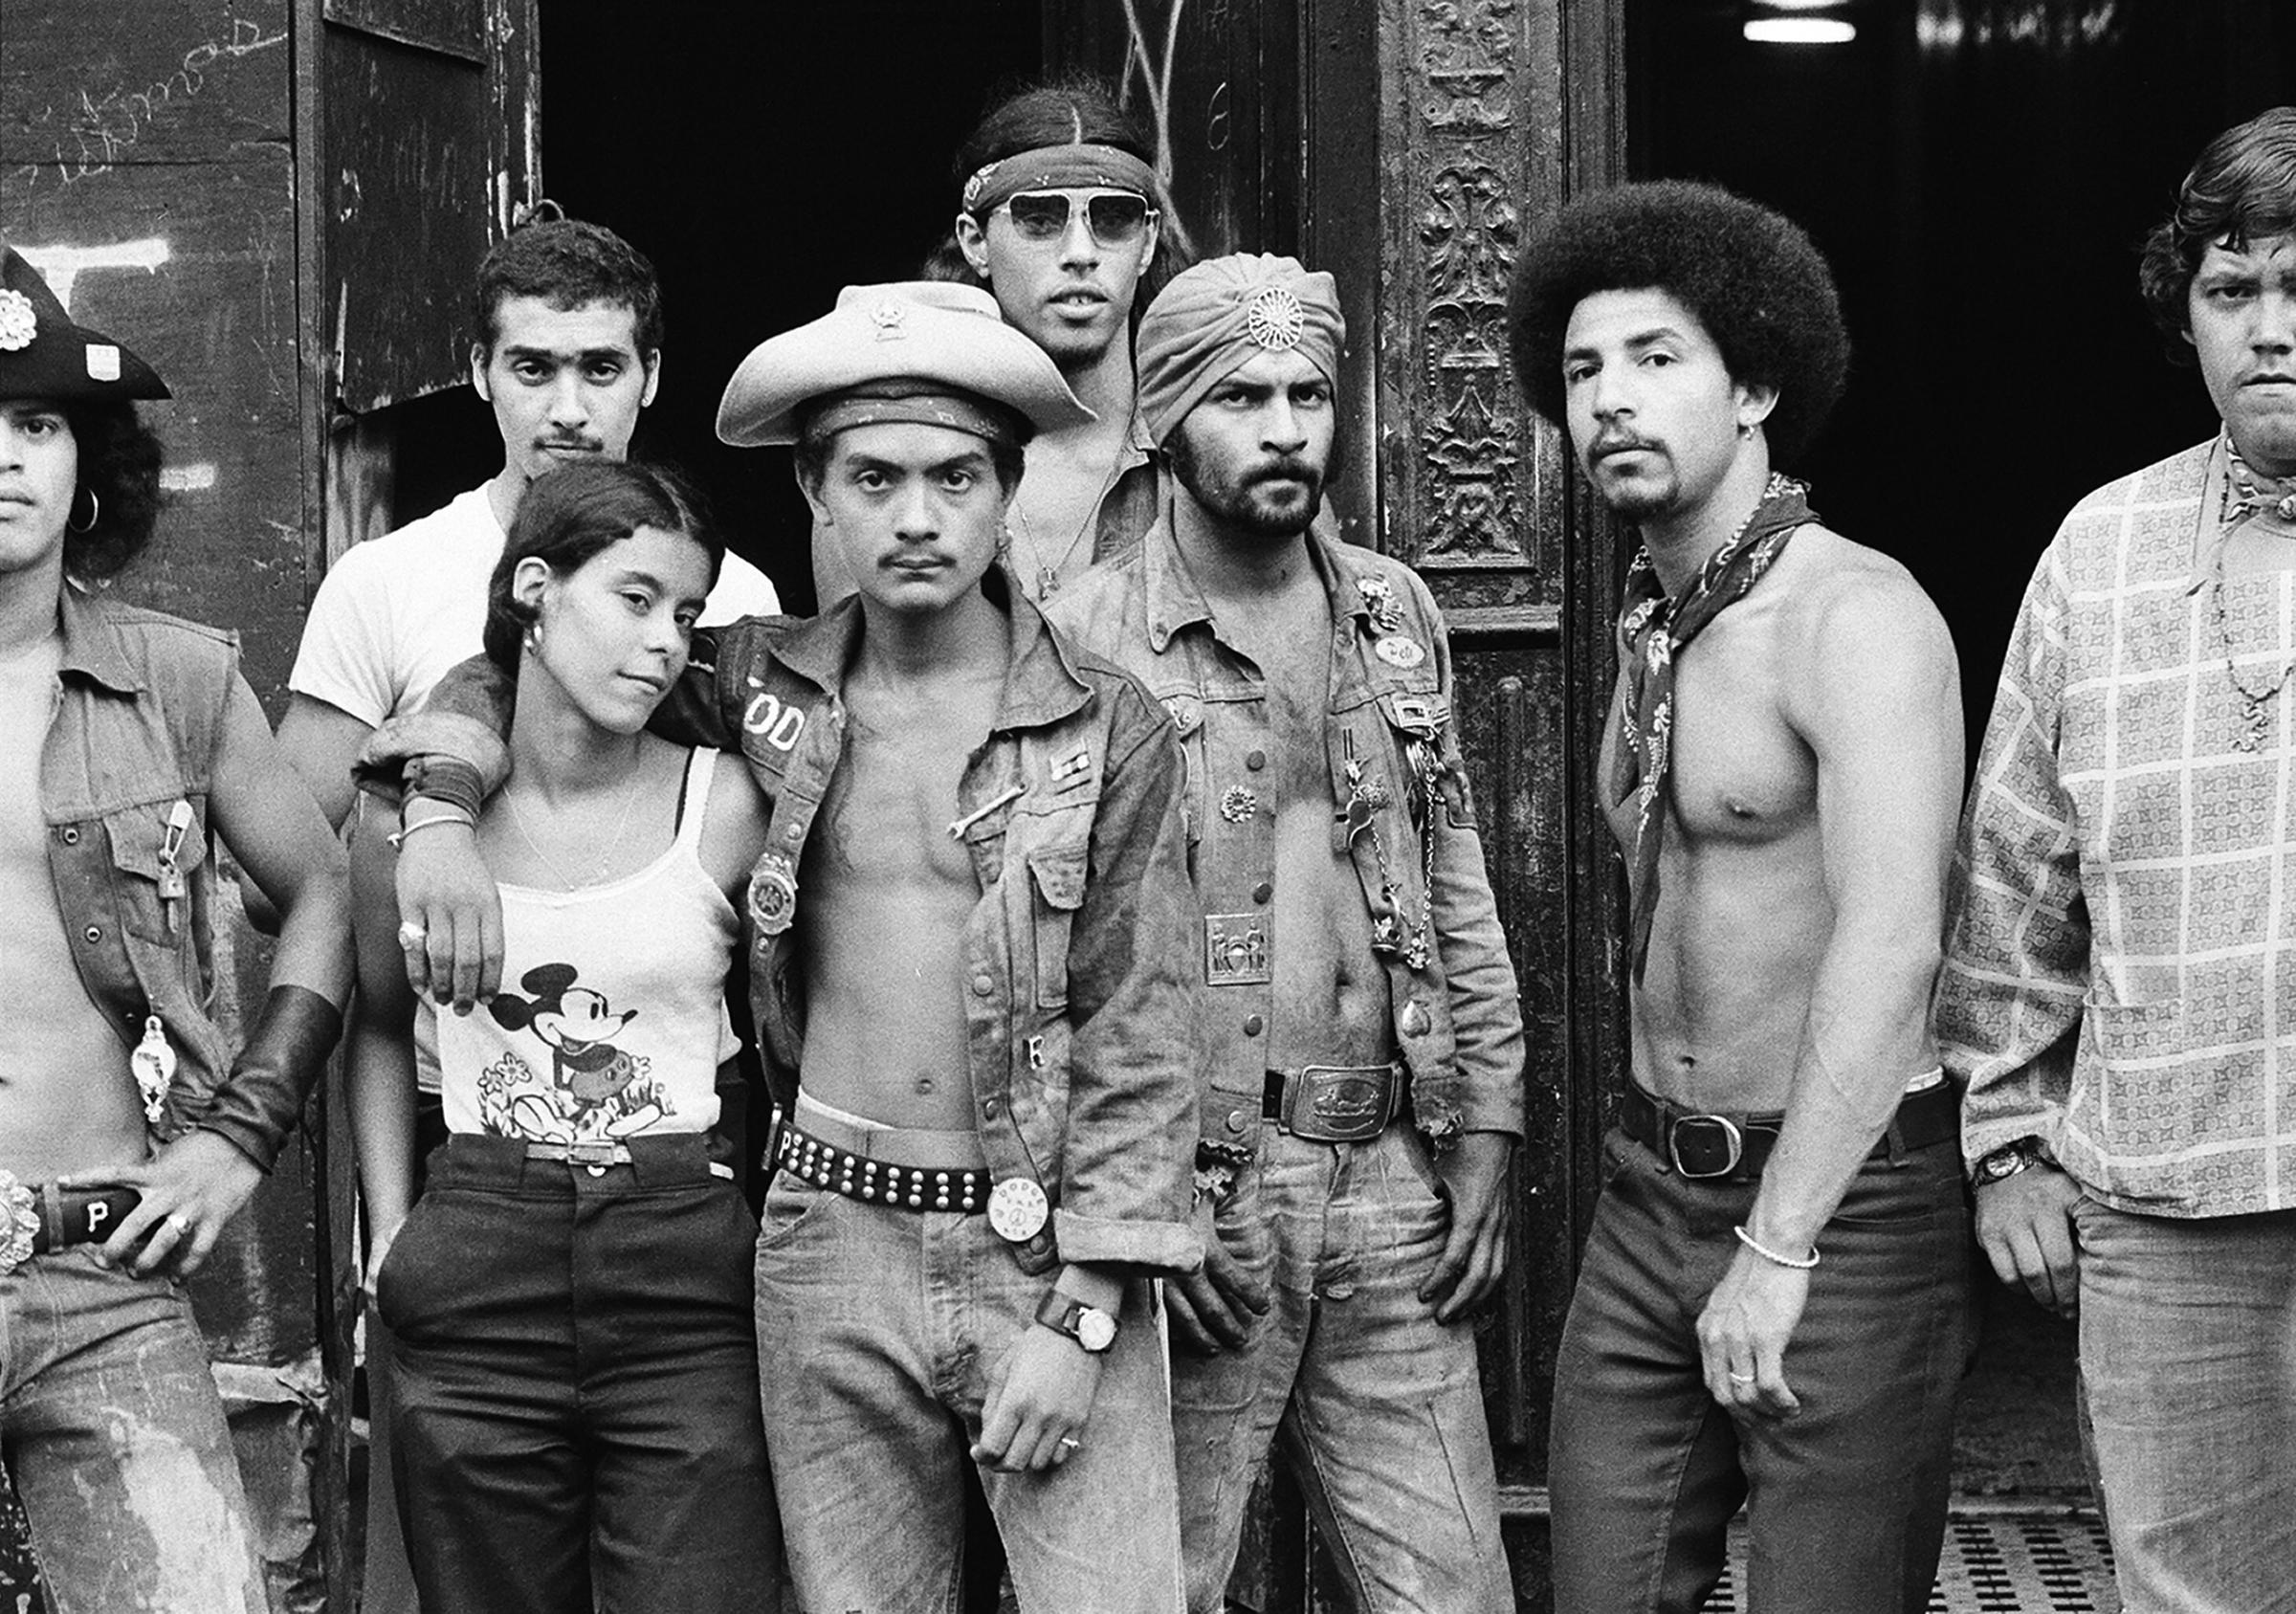 Group portrait of members of Bronx street gang the Dragons, 1975.